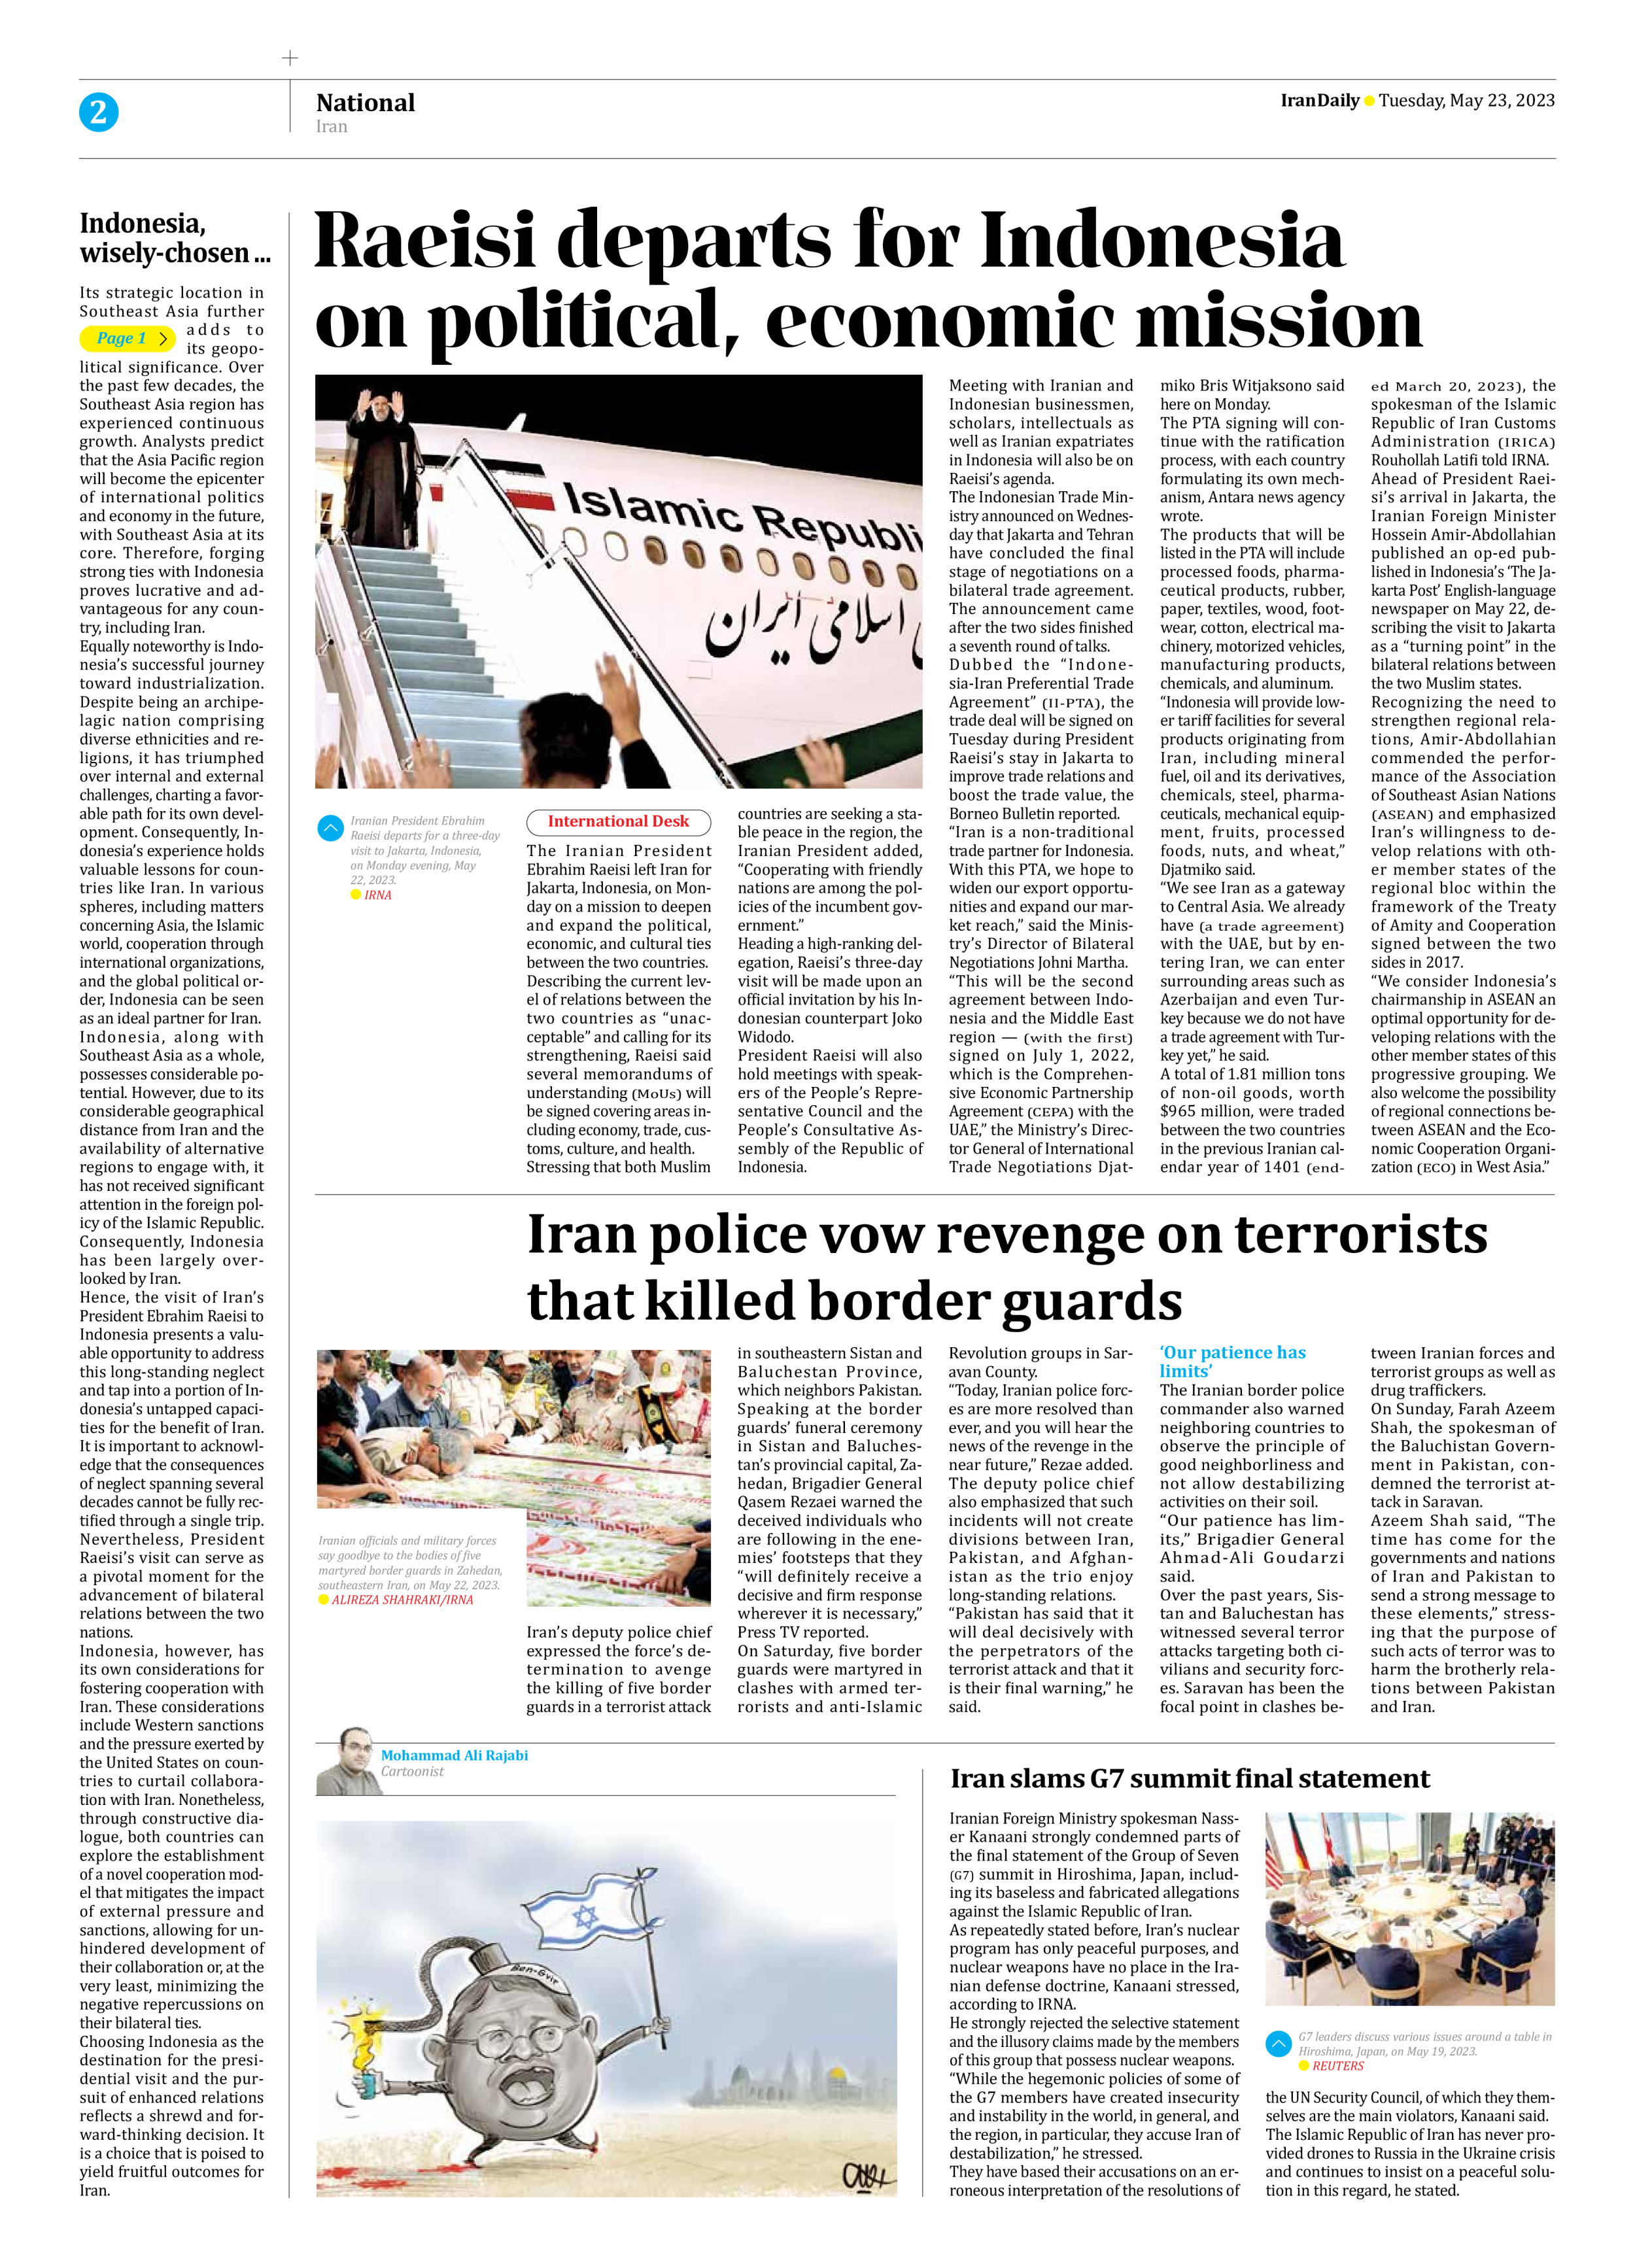 Iran Daily - Number Seven Thousand Two Hundred and Ninety Eight - 23 May 2023 - Page 2